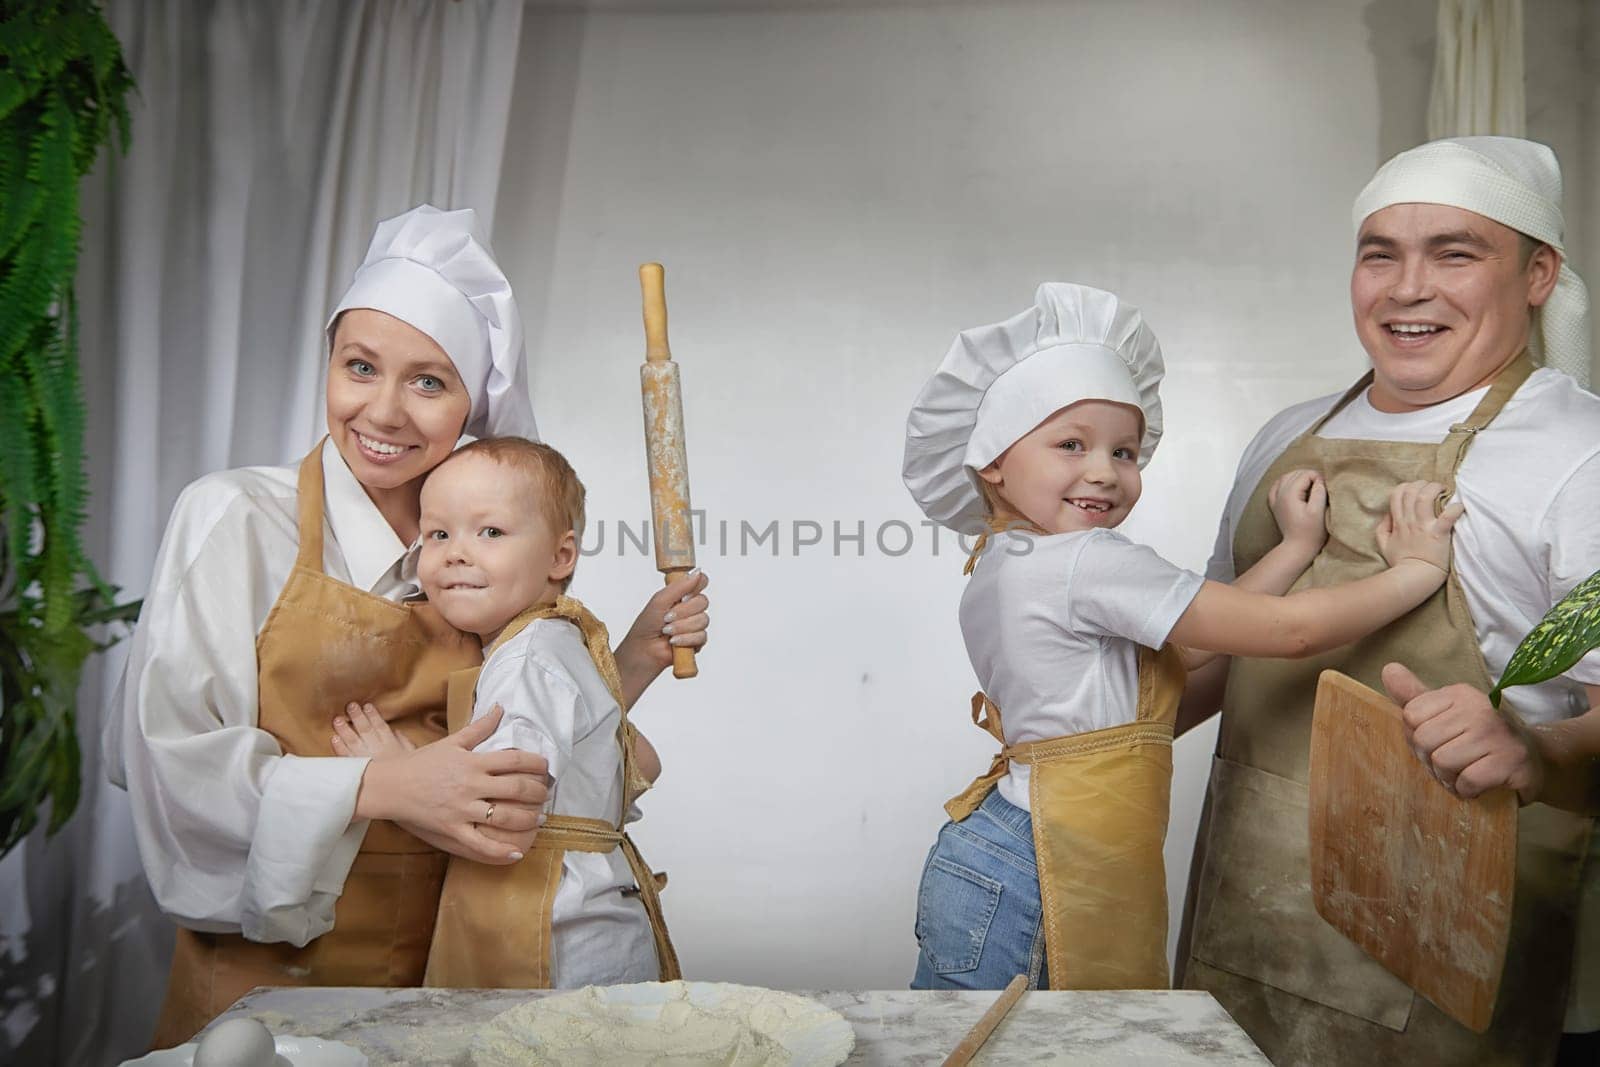 Cute oriental family with mother, father, daughter, son cooking in the kitchen on Ramadan, Kurban-Bairam, Eid al-Adha. Funny family at cook photo shoot. Pancakes, pastries, Maslenitsa, Easter by keleny